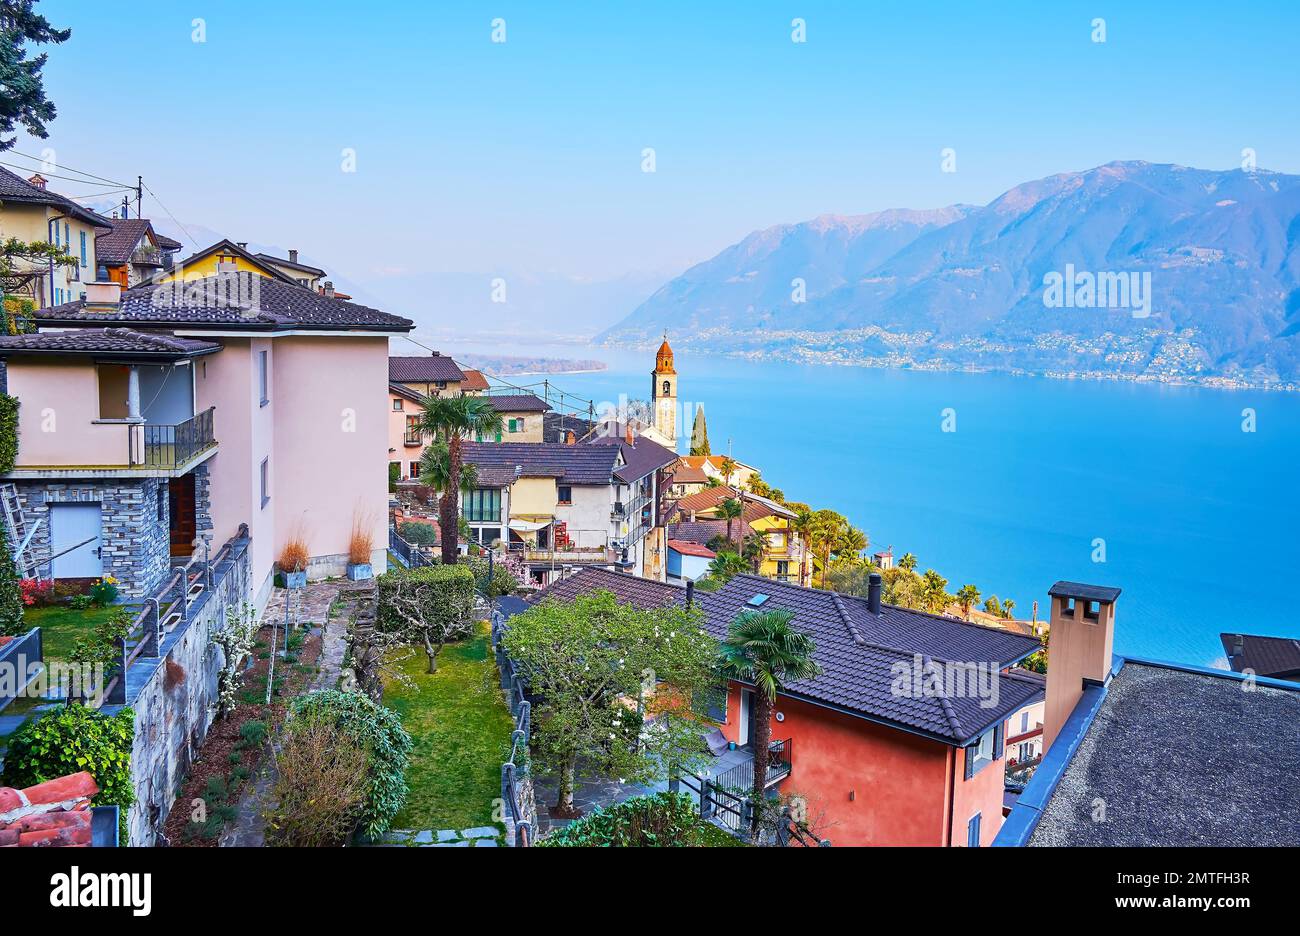 The beautiful mountain village of Ronco sopra Ascona with small houses, green gardens, clocktower of San Martino Church and blue Lake Maggiore in back Stock Photo